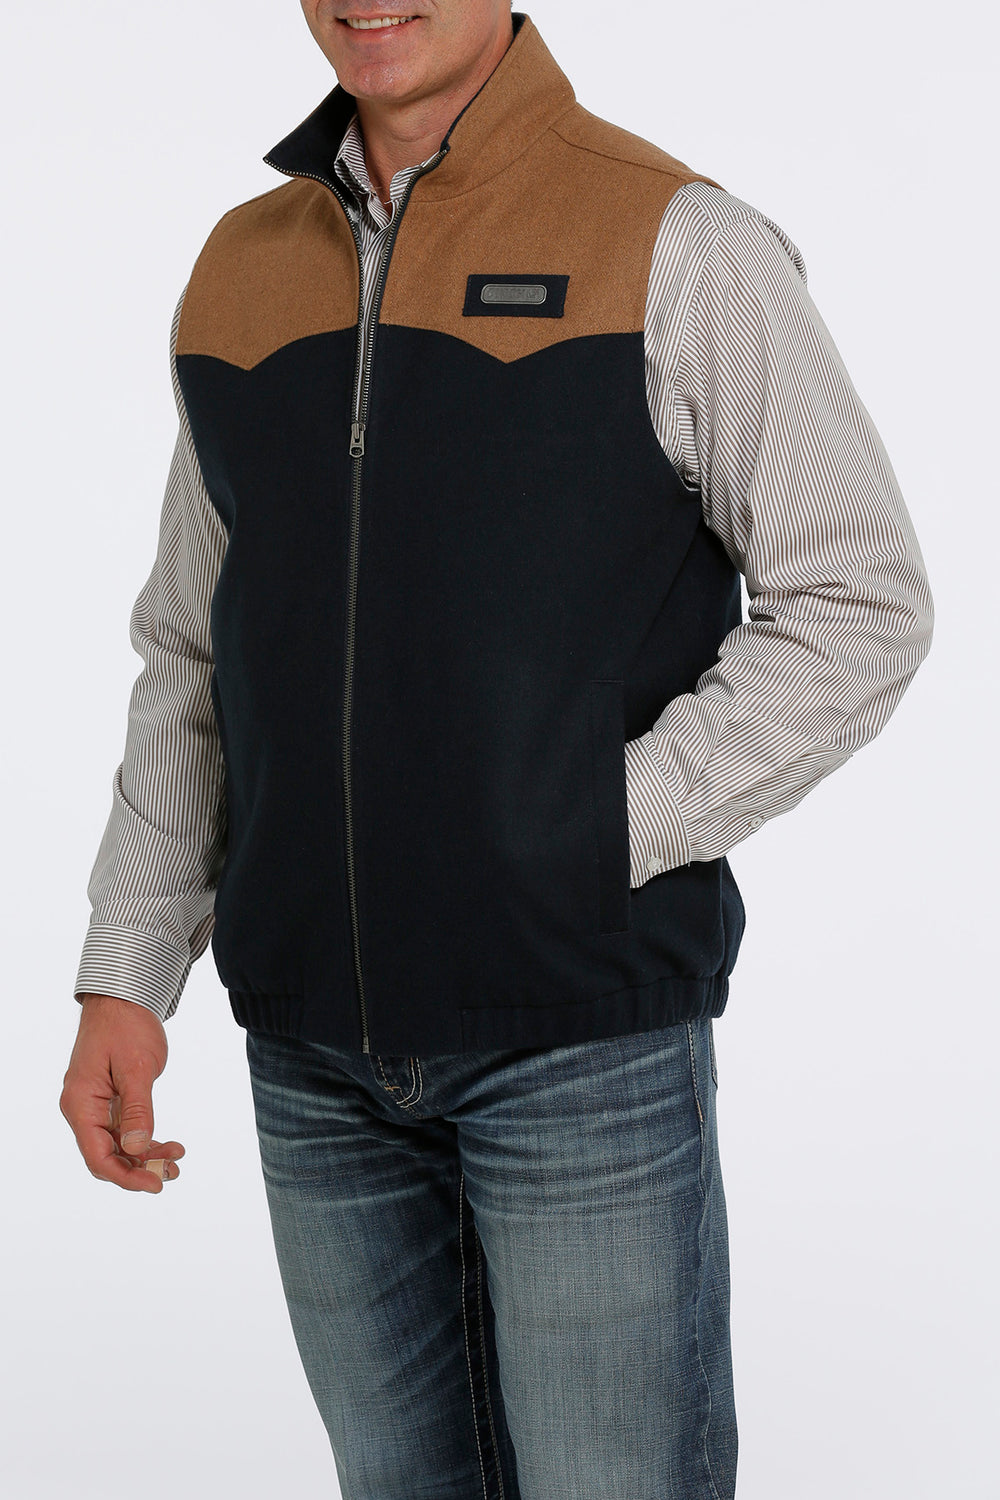 side viewCinch | Navy Poly Wool Concealed Carry Vest